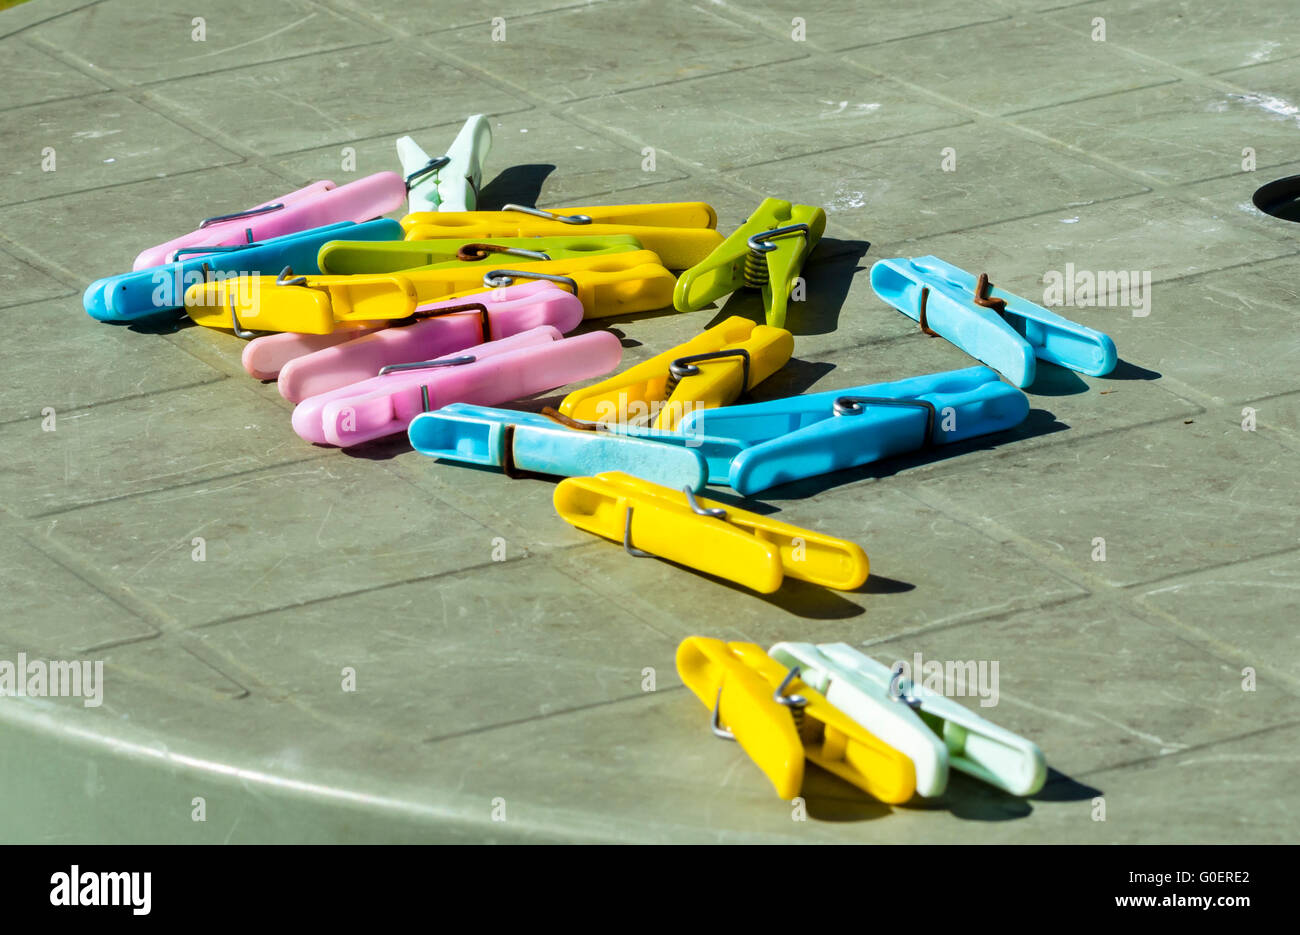 Plastic clothes pegs on an outdoor patio table. Stock Photo